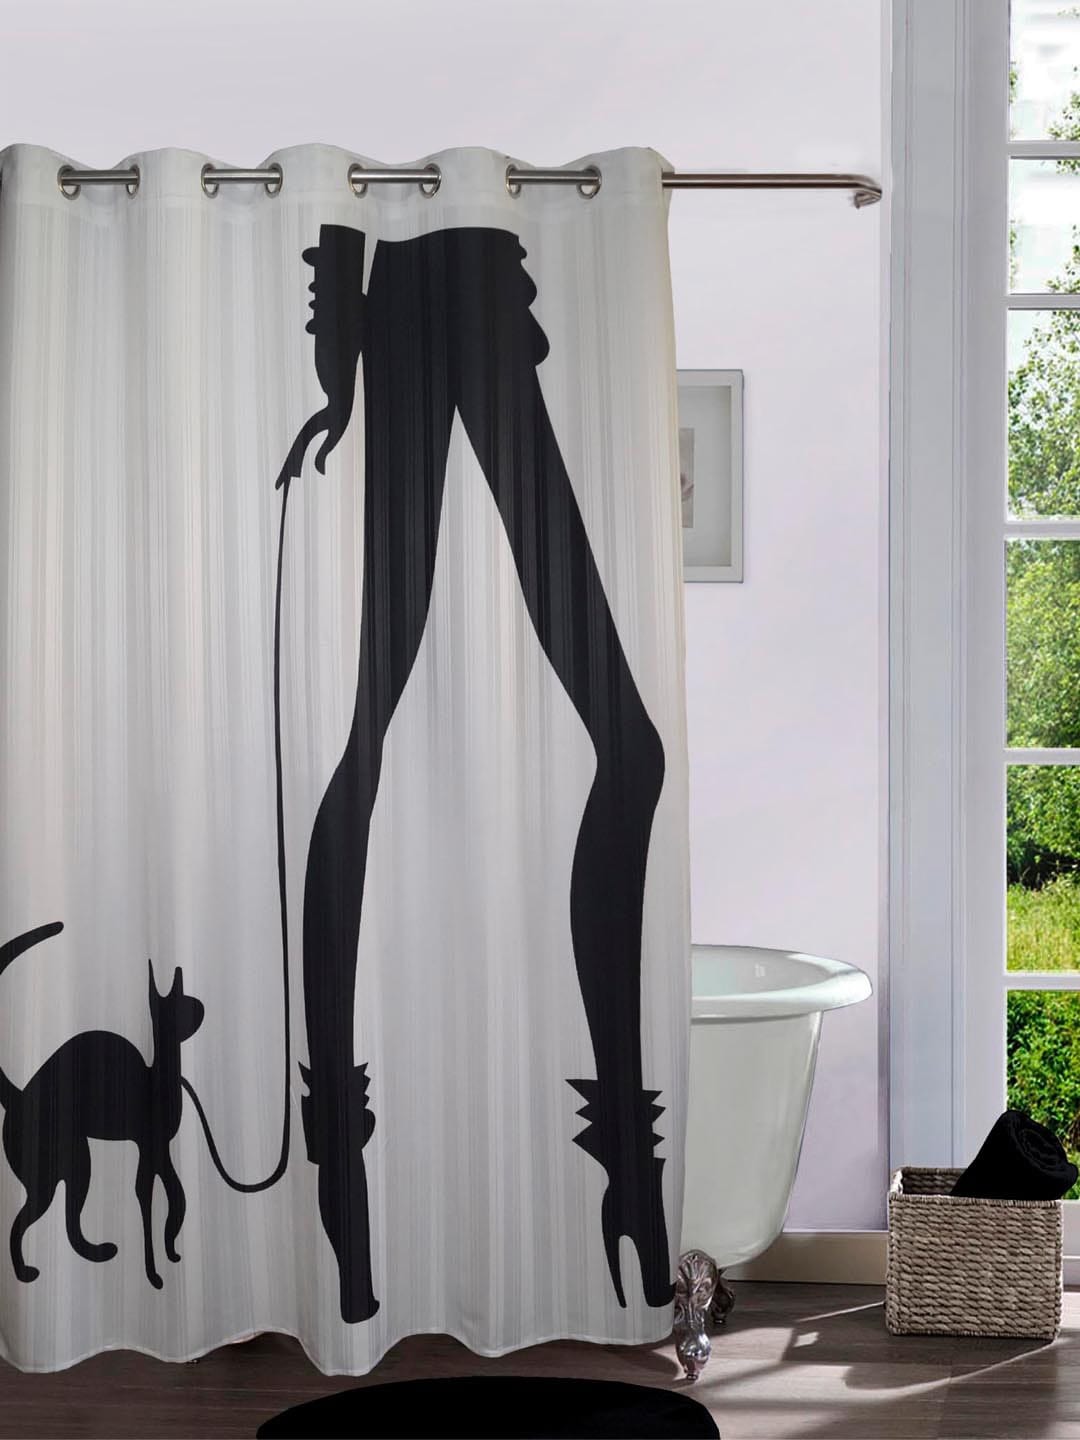 Lushomes Off-White & Black Digitally Printed Cat Woman Shower Curtain with 10 Eyelets Price in India